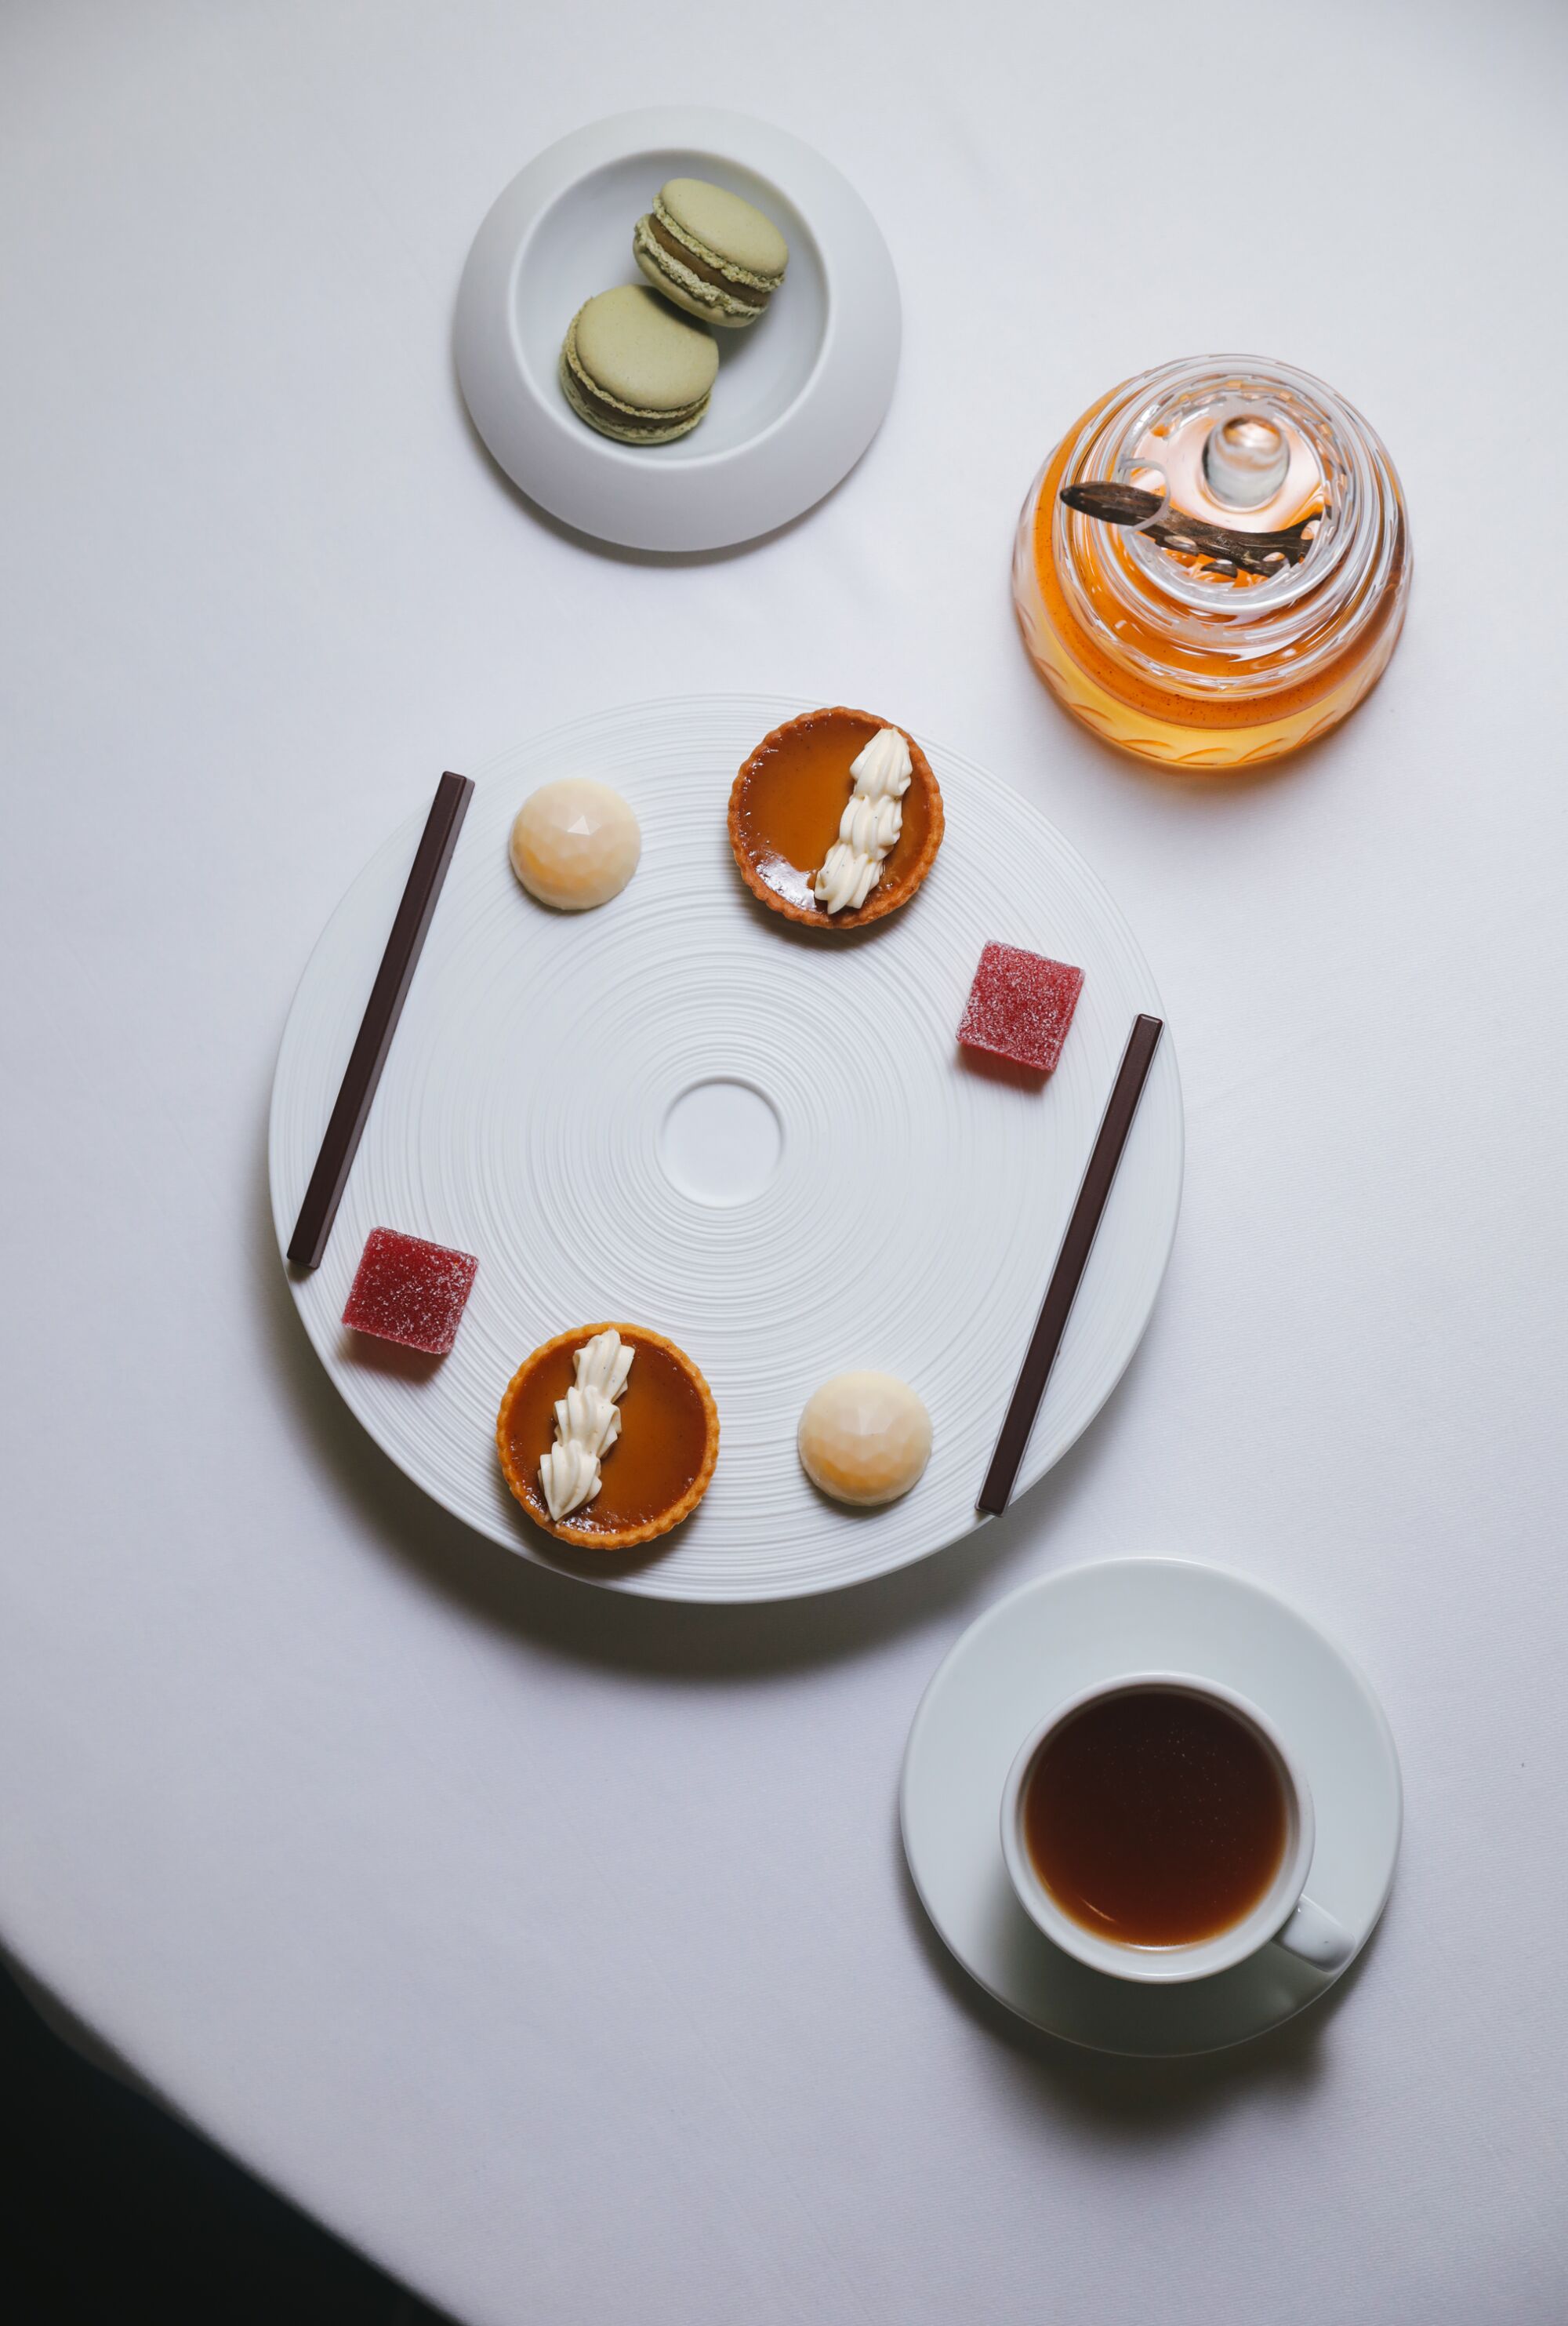 Macarons and a fancy dessert plate with a cup of tea